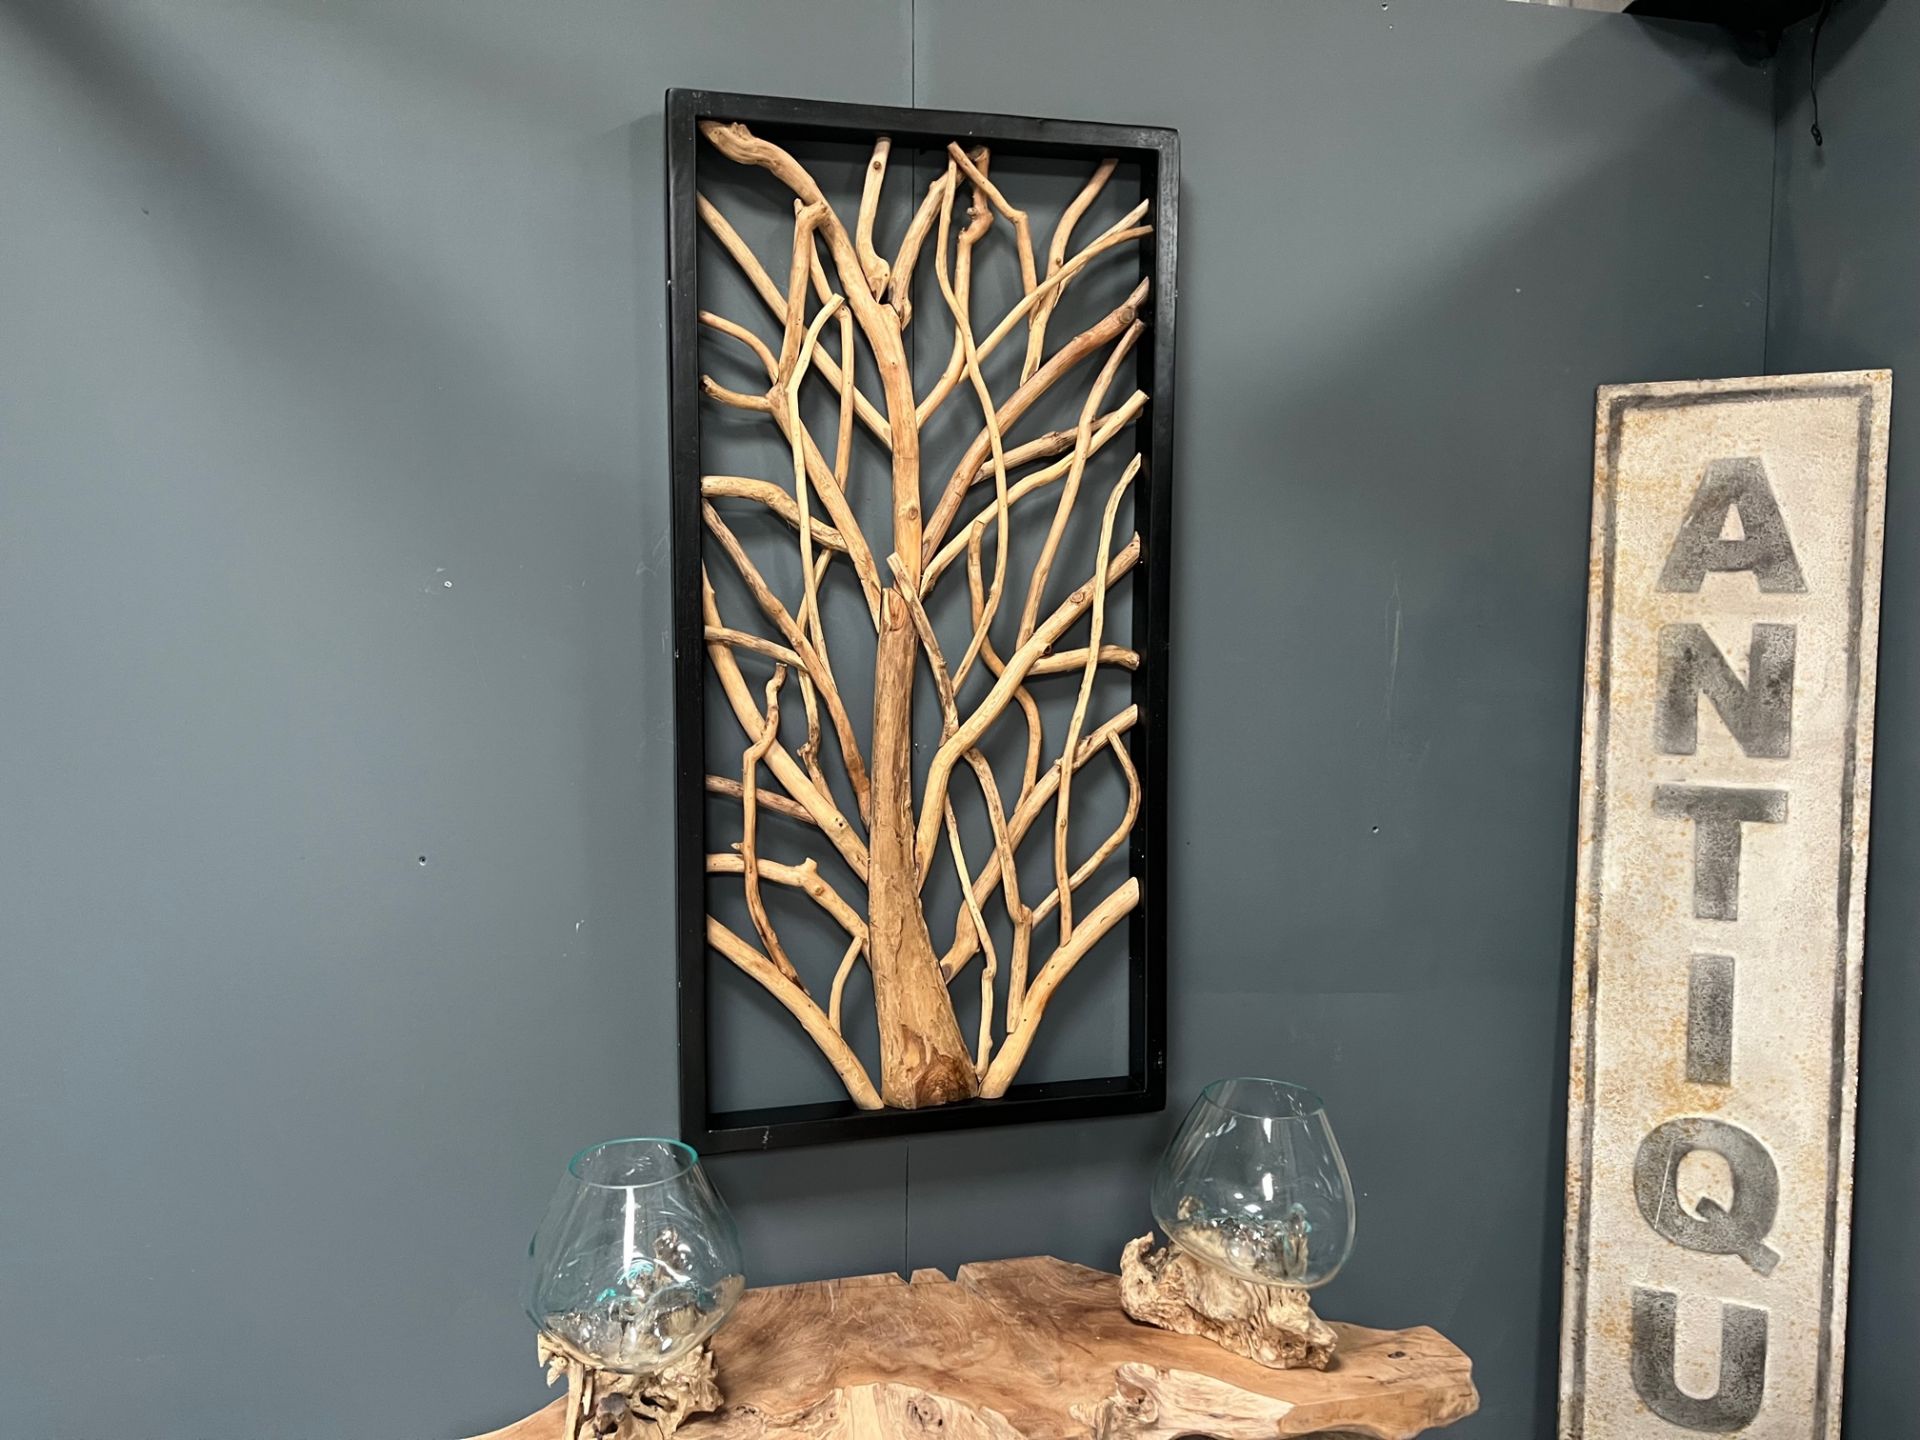 HUGE 120CM TALL TEAK ROOTWOOD RUSTIC WALL ART DECOR IN BLACK FRAME (PLEASE NOTE EVERY ONE IS